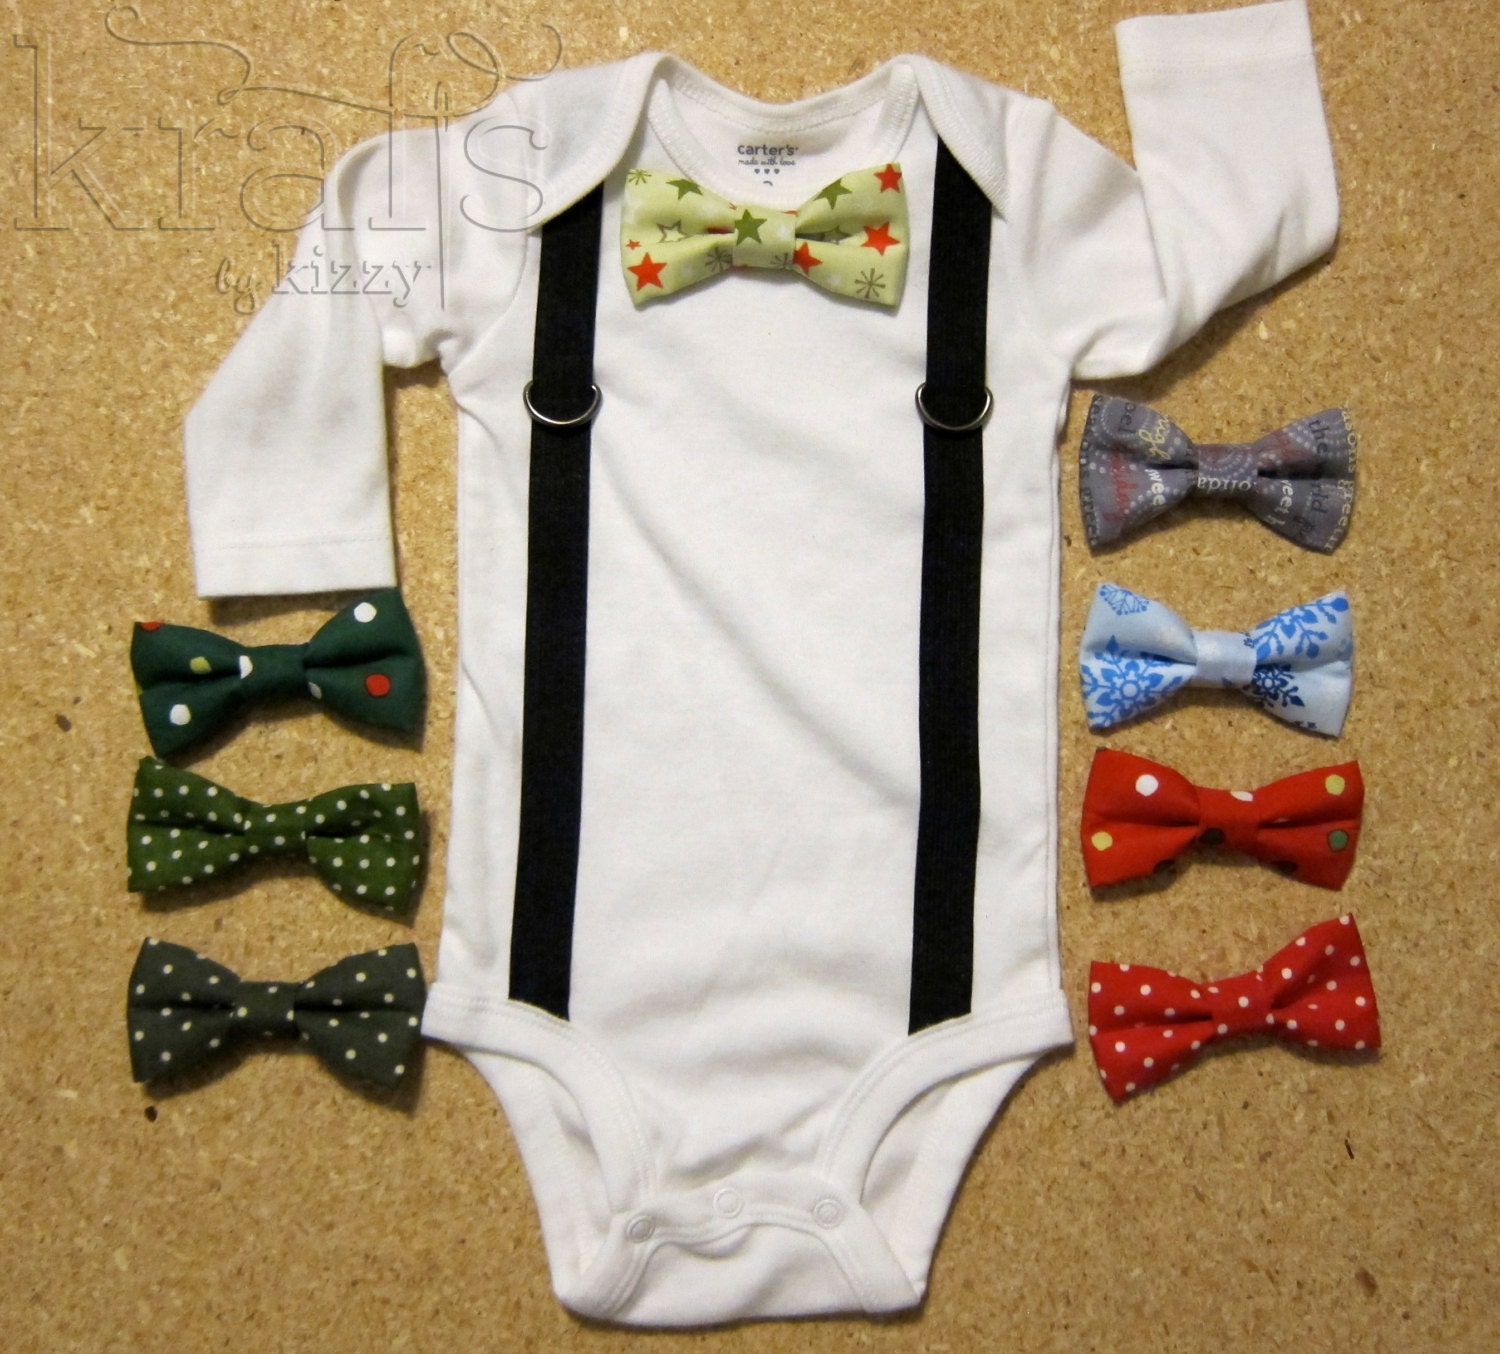 Baby Boy Long-sleeved Suspender Outfit and your choice of 1